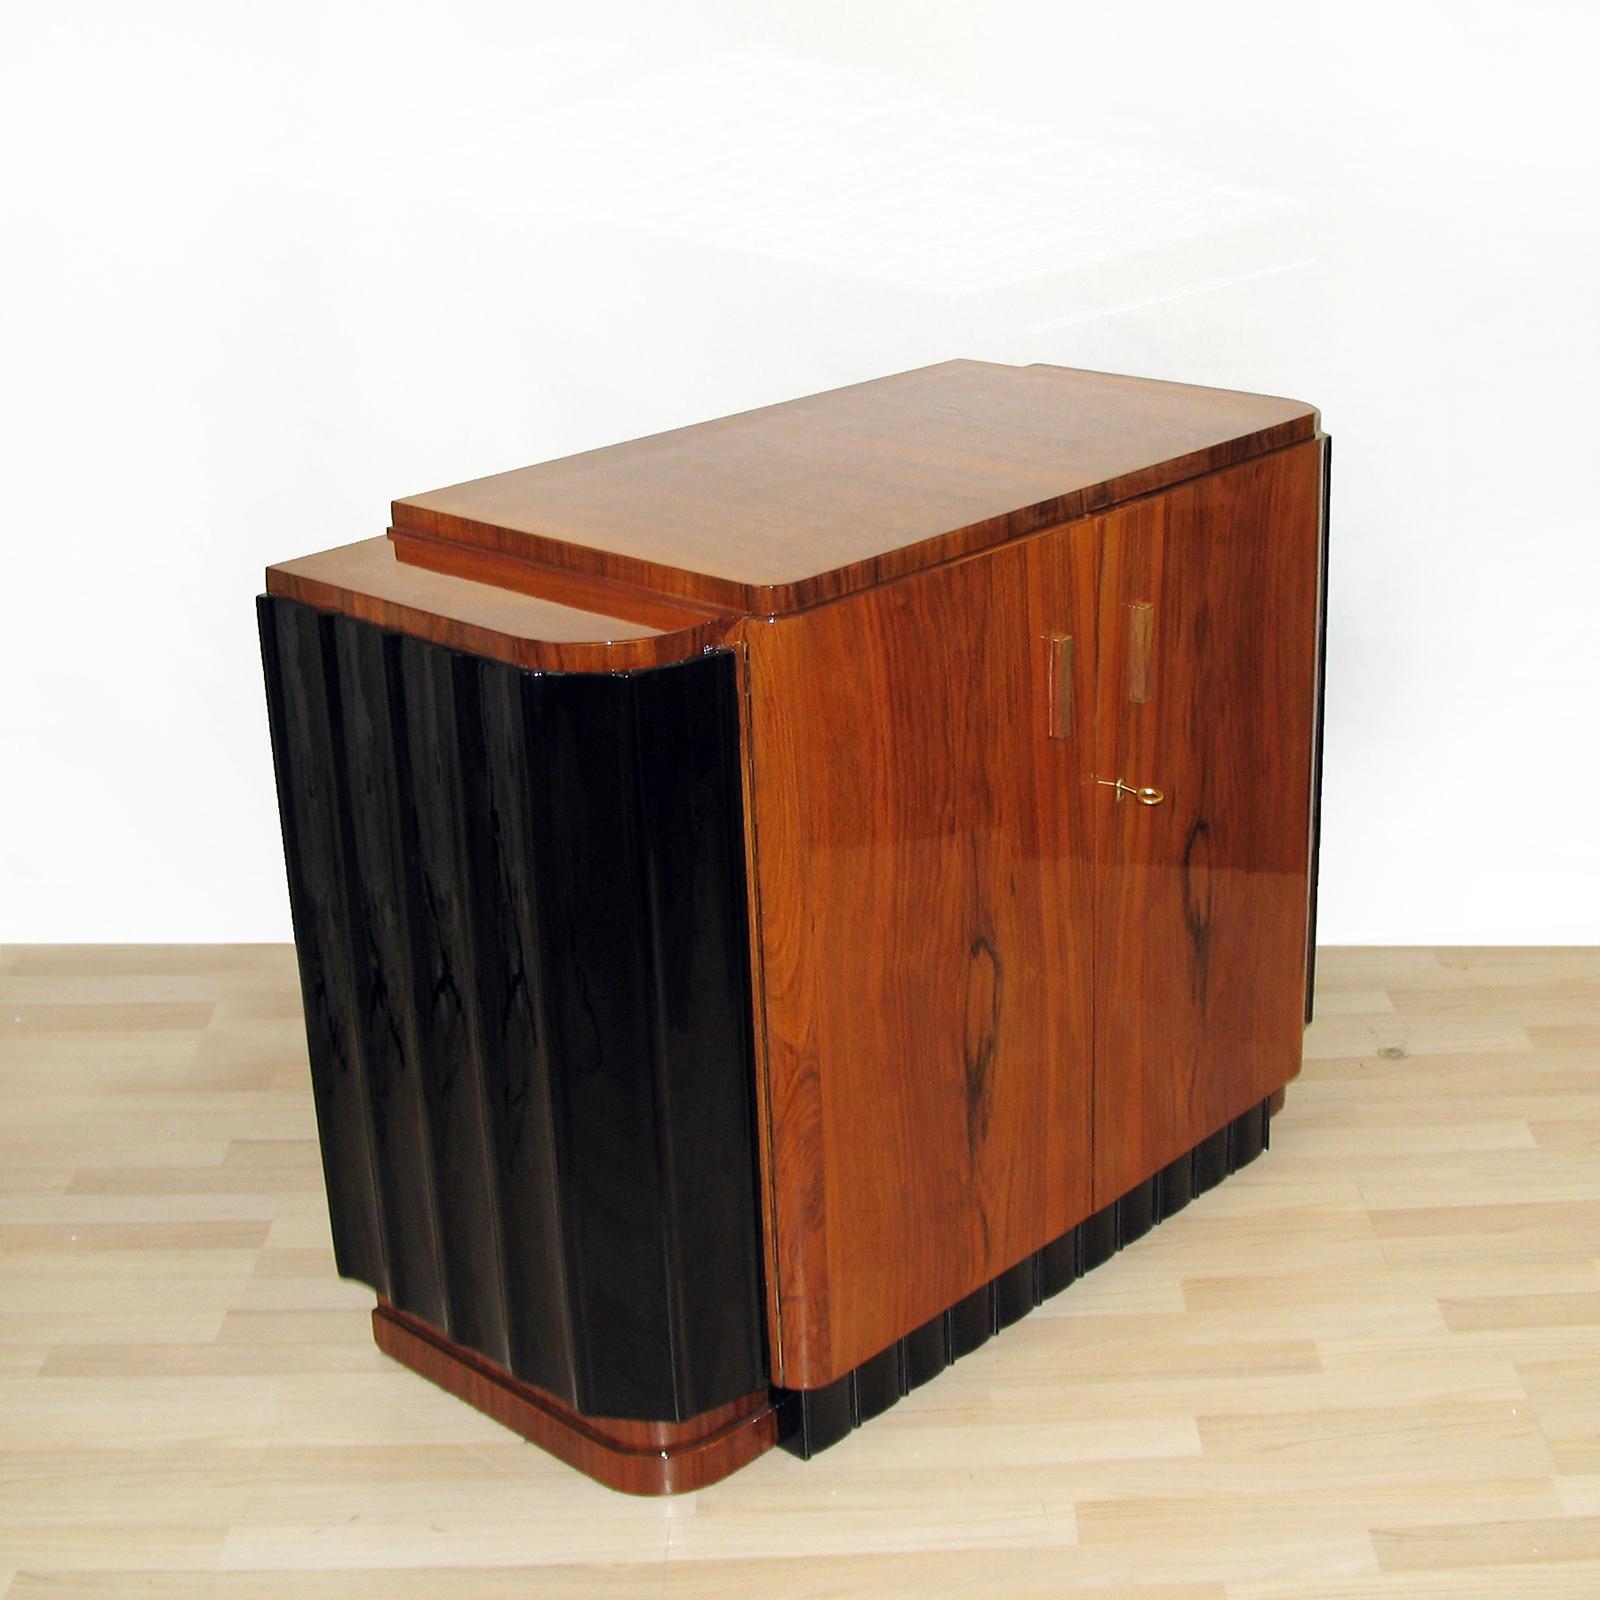 Lacquered Art Deco Sideboard, Walnut Veneer, Black Fluted Sides by Francisque Chaleyssin